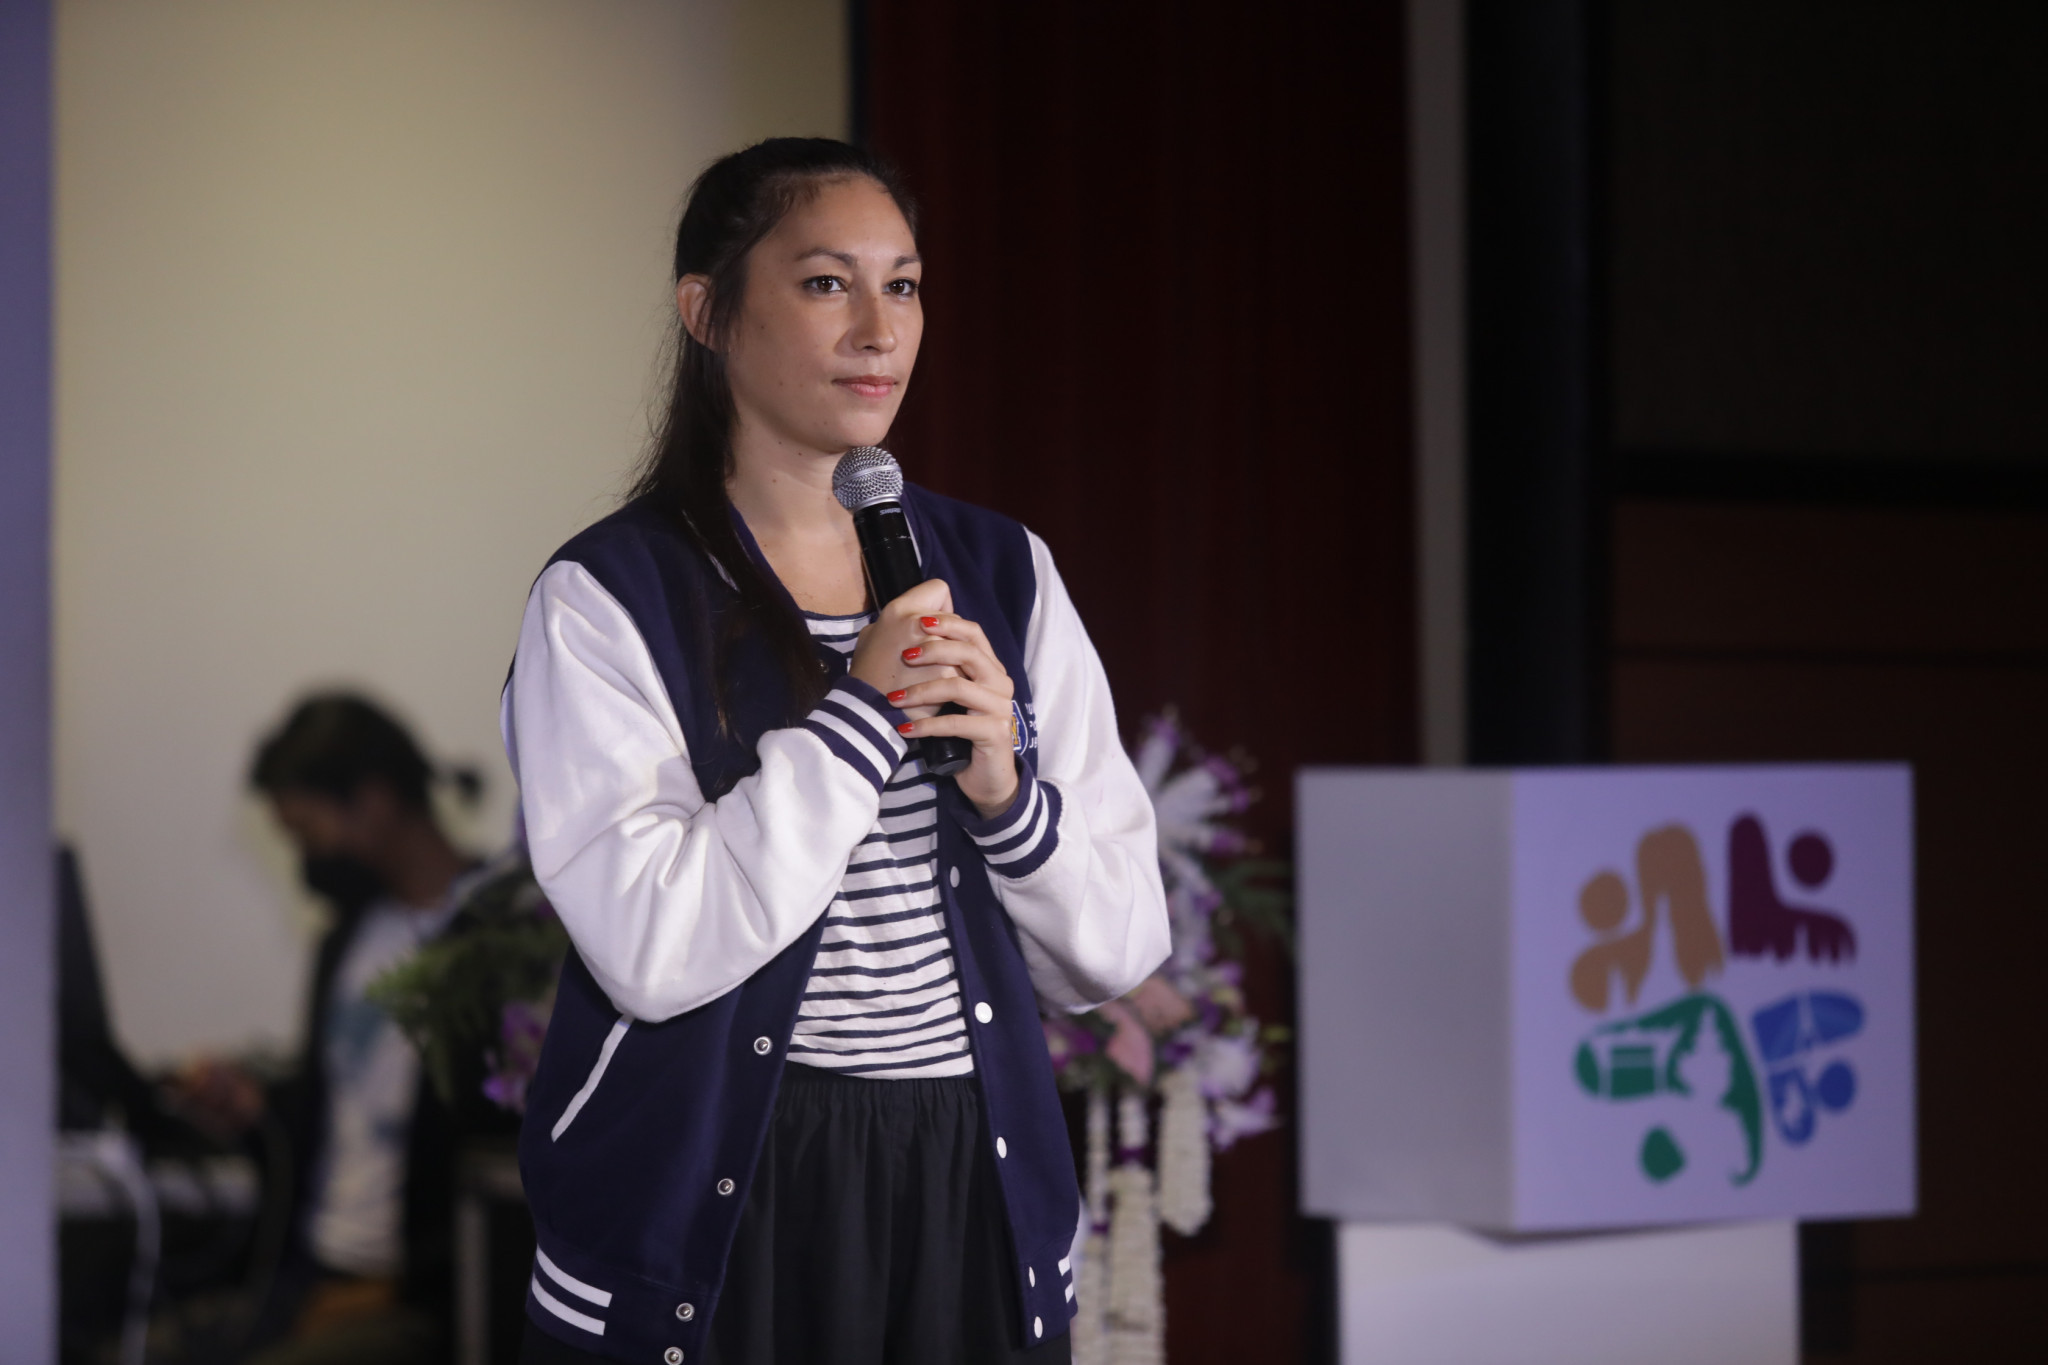 Yunus Sports Hub has announced plans to team up with the IFMA and UNESCO to provide "economic opportunities in sustainable way" for youth and women ©UTS